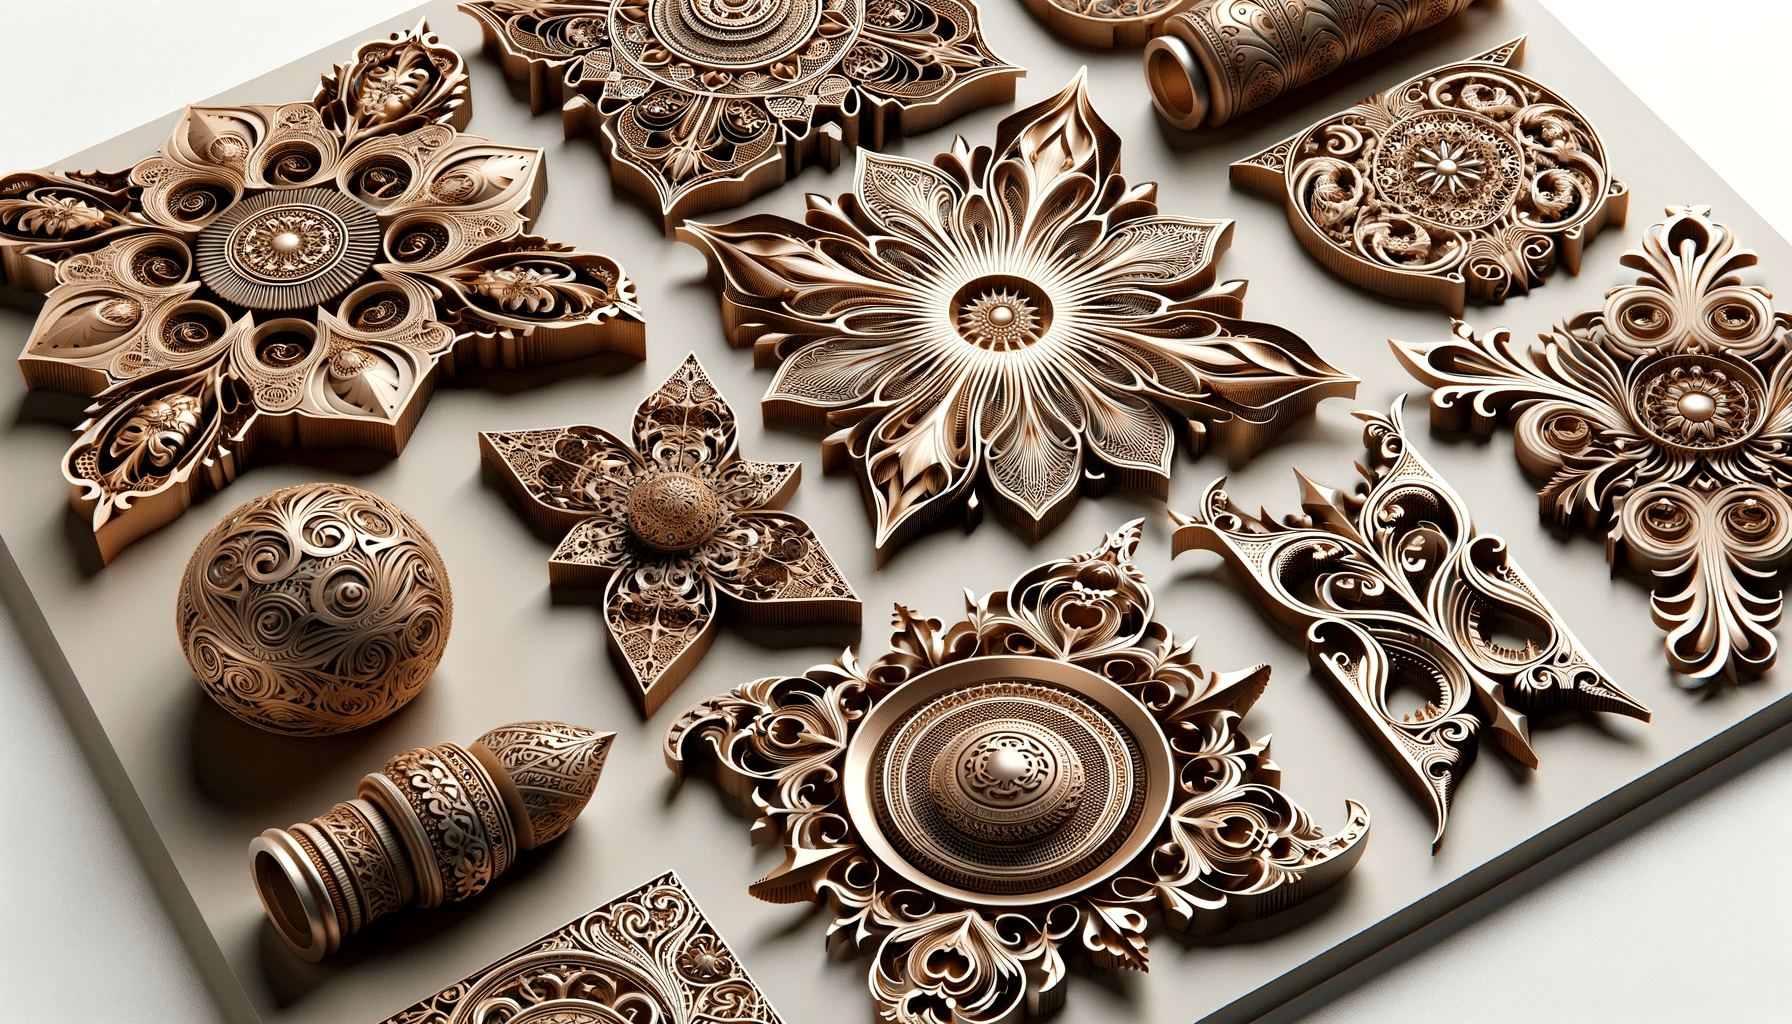 Collection of ornaments with complex patterns, all precisely engraved using CNC technology, focusing on the sharp details and accuracy of